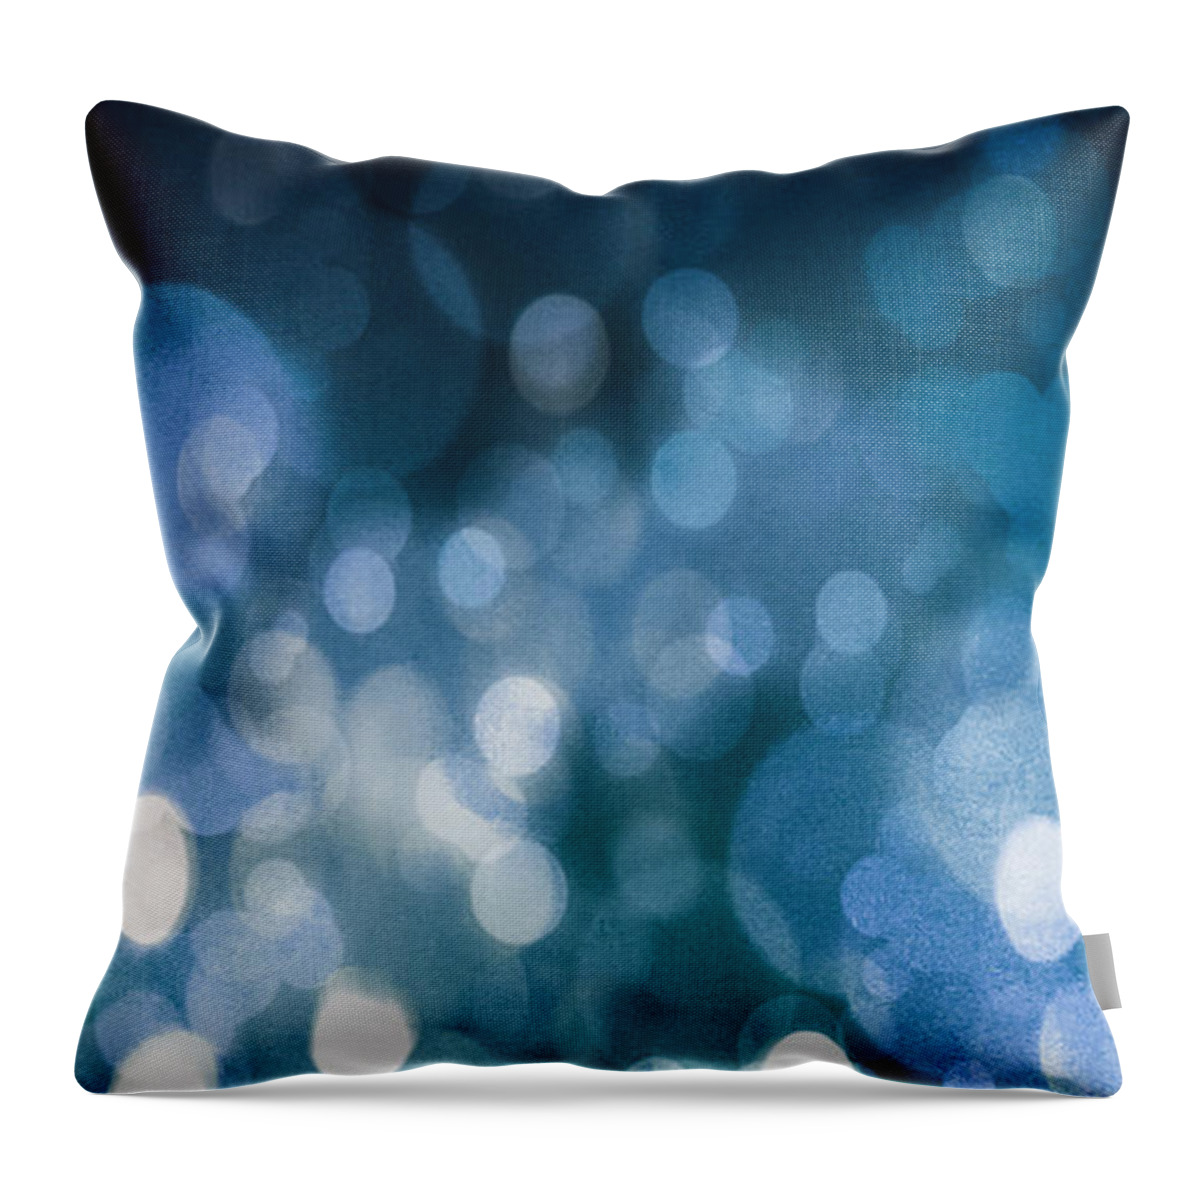 Ombre Throw Pillow featuring the photograph Blue by Carlee Ojeda